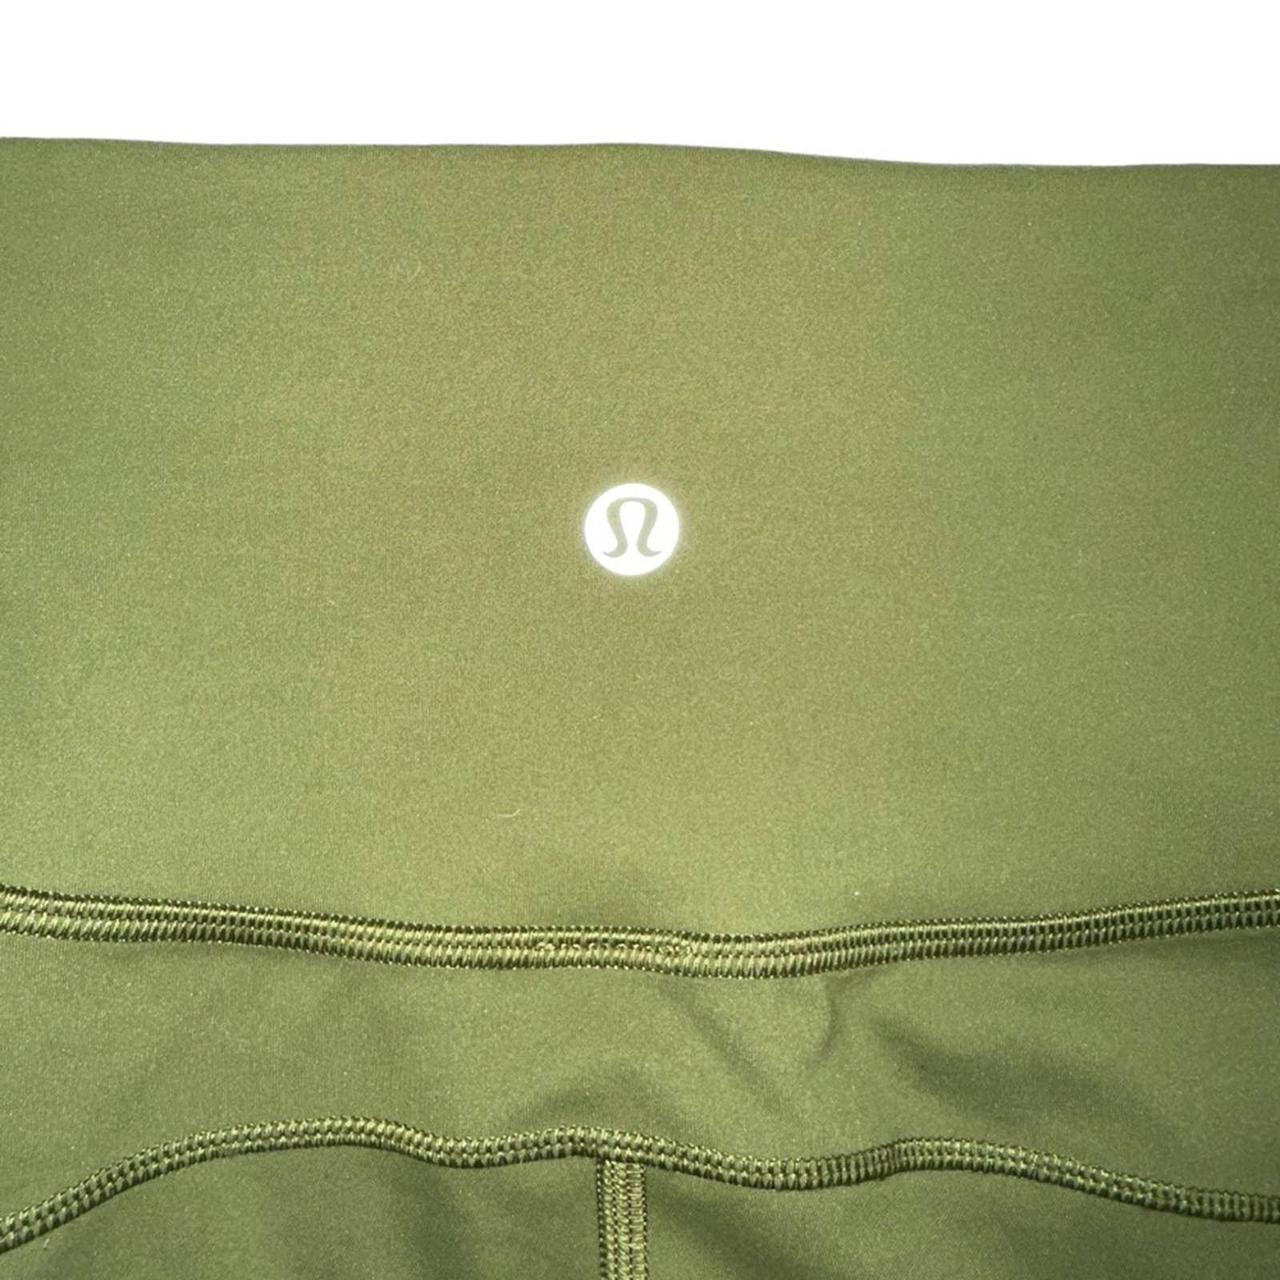 Lululemon In Movement Tight 25 with a hidden back